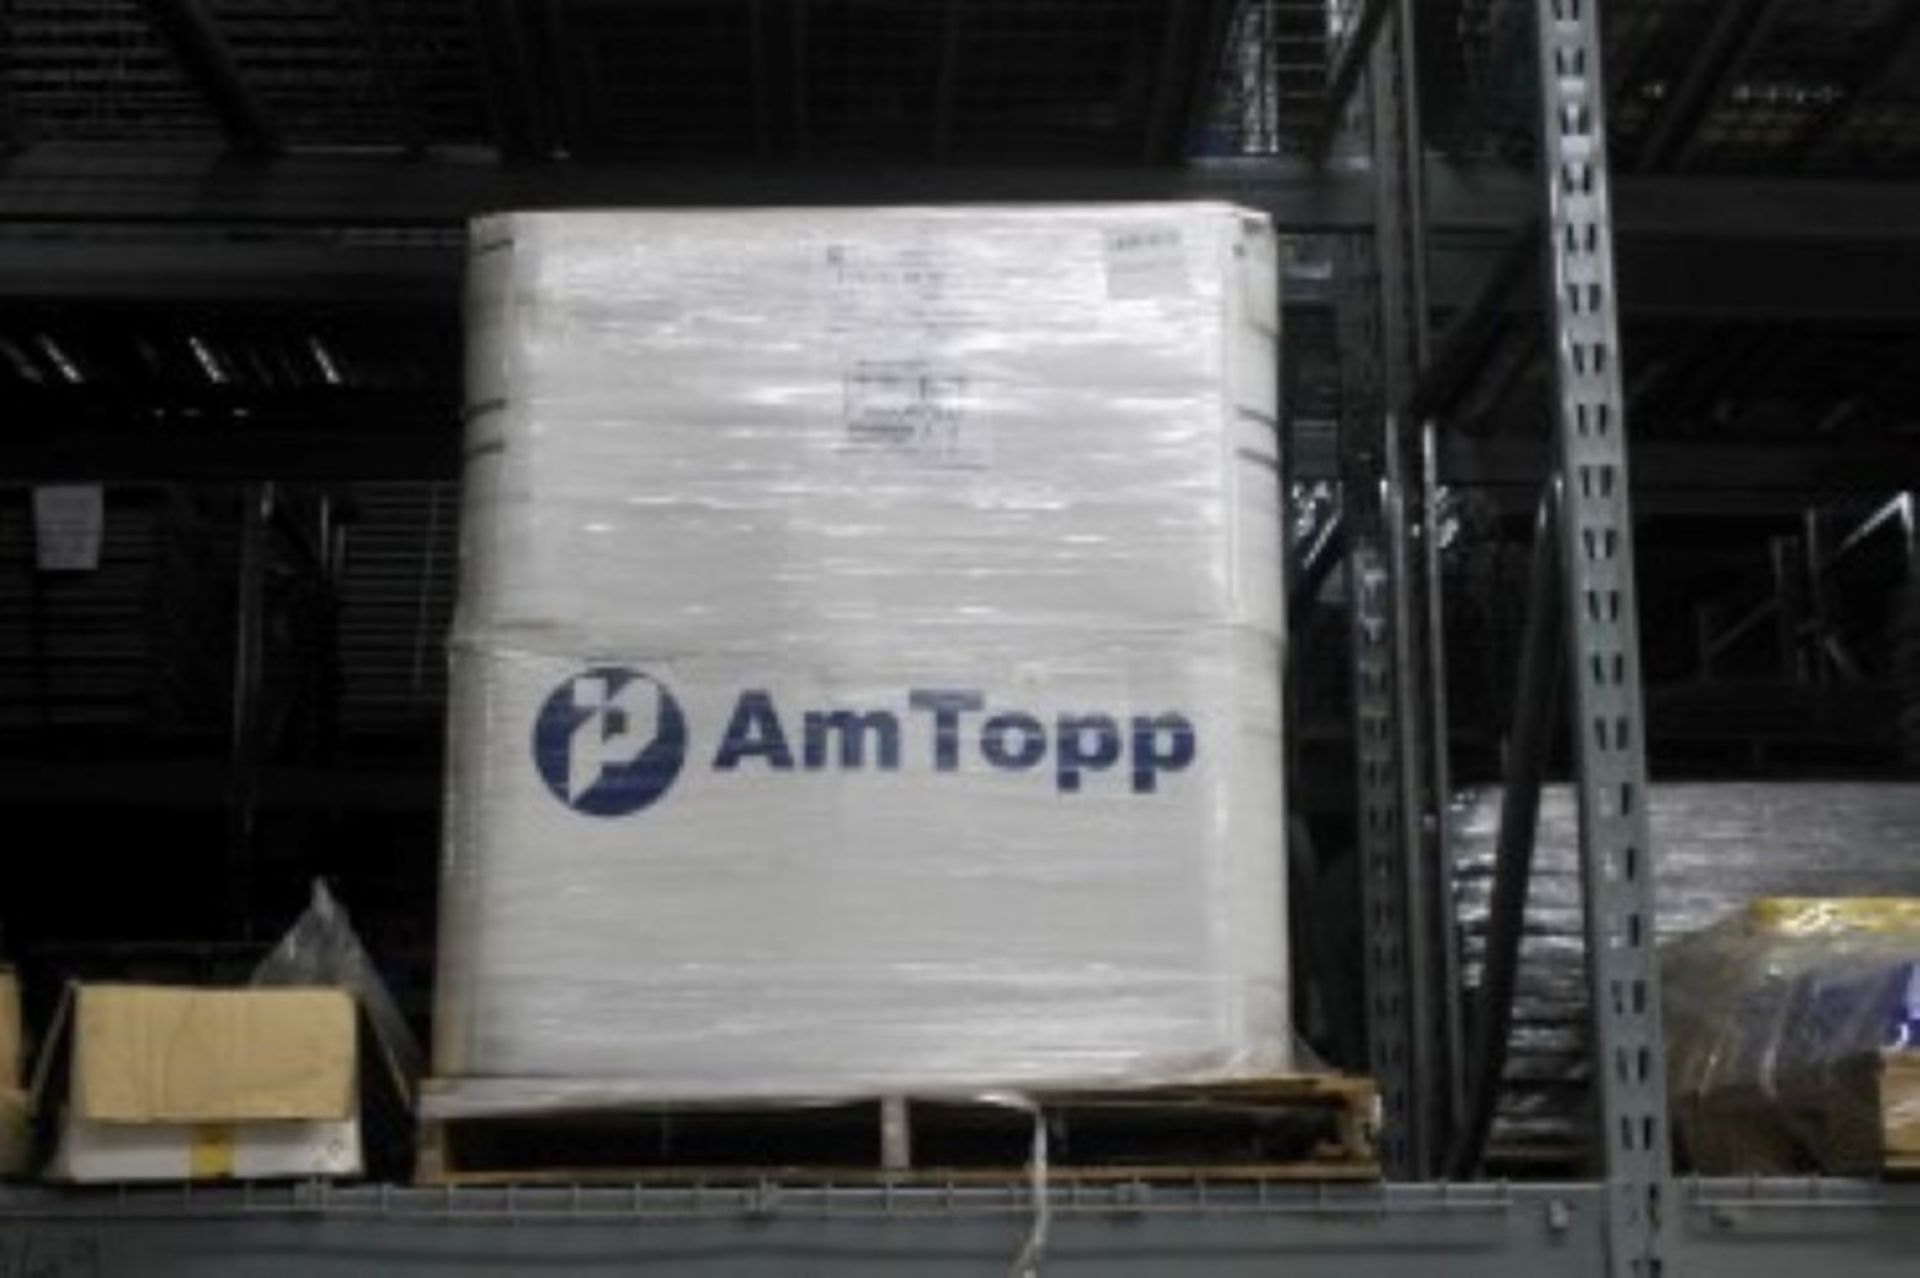 FULL PALLET OF AMTOP XTREME 0.63MIL X 20 INCH-CLEAN STRETCH FILM ROLL 50 ROLLS TOTAL IN PALLET - Image 3 of 3